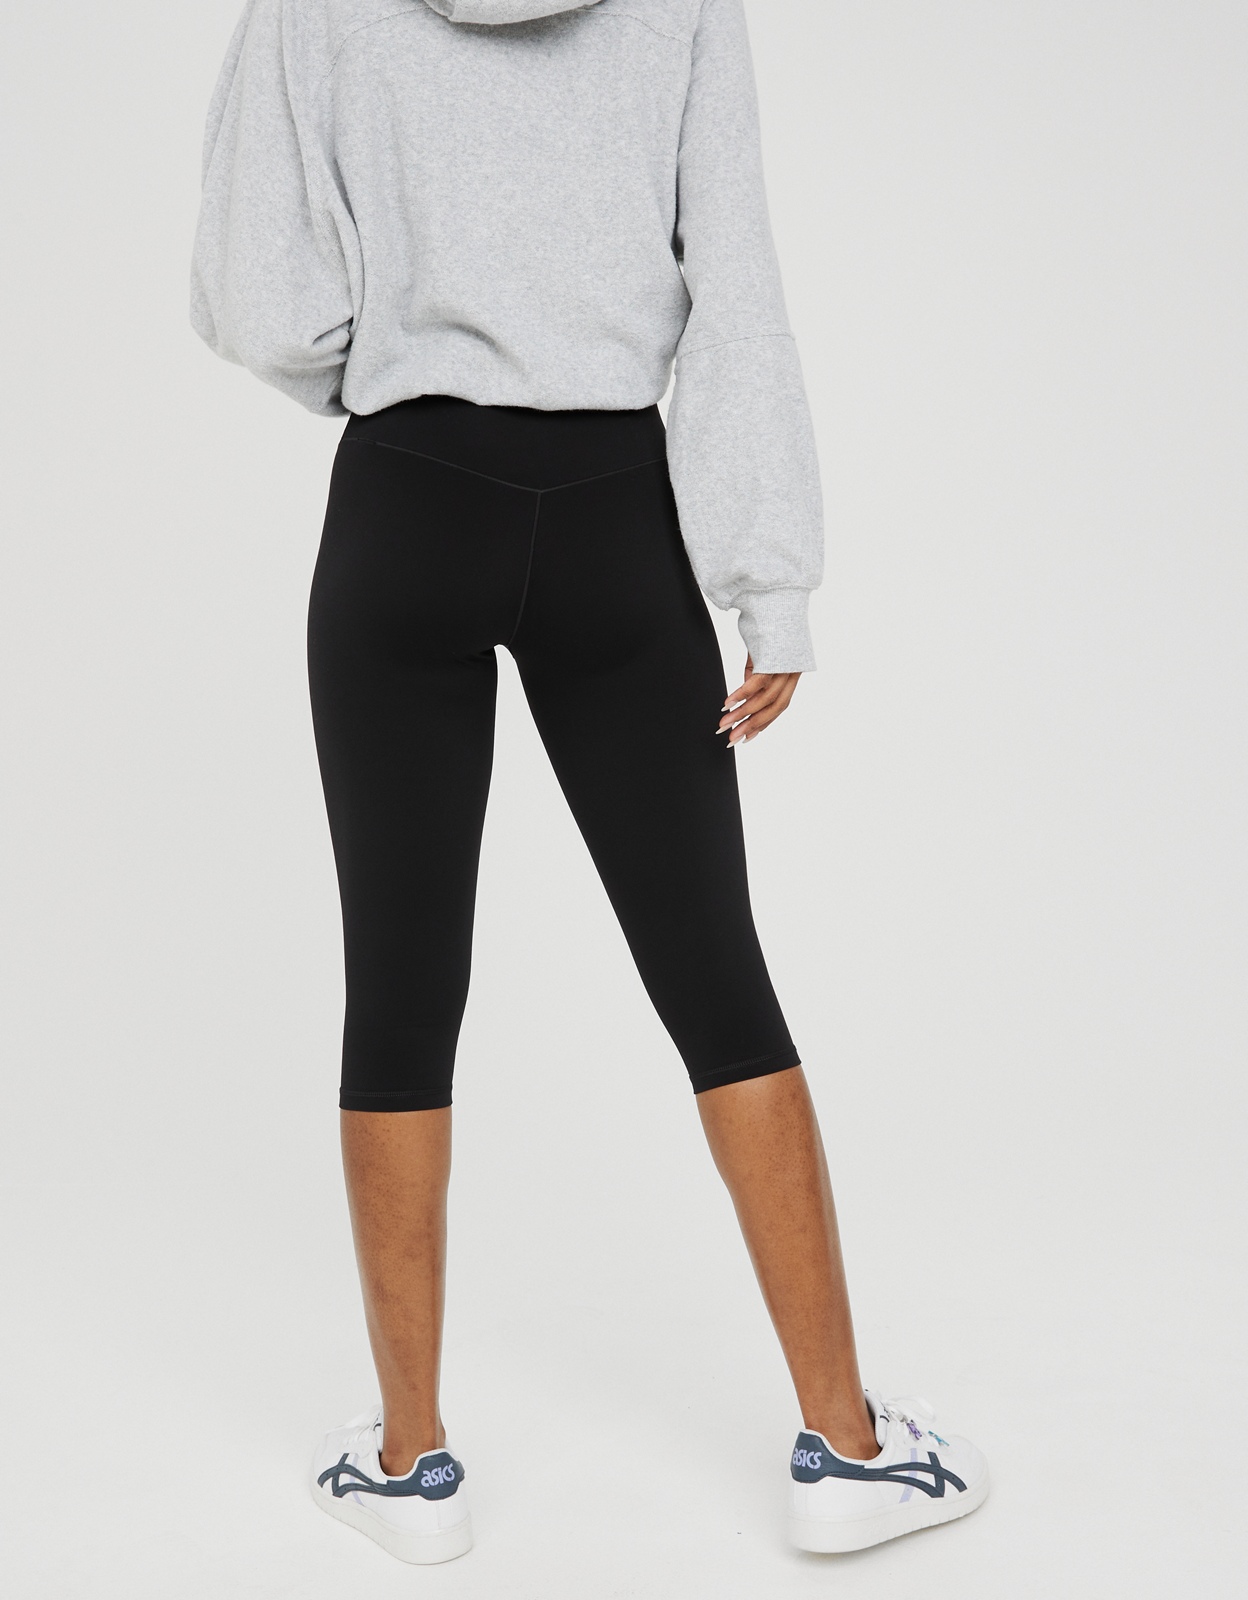 Buy OFFLINE By Aerie Real Me Cropped Legging online